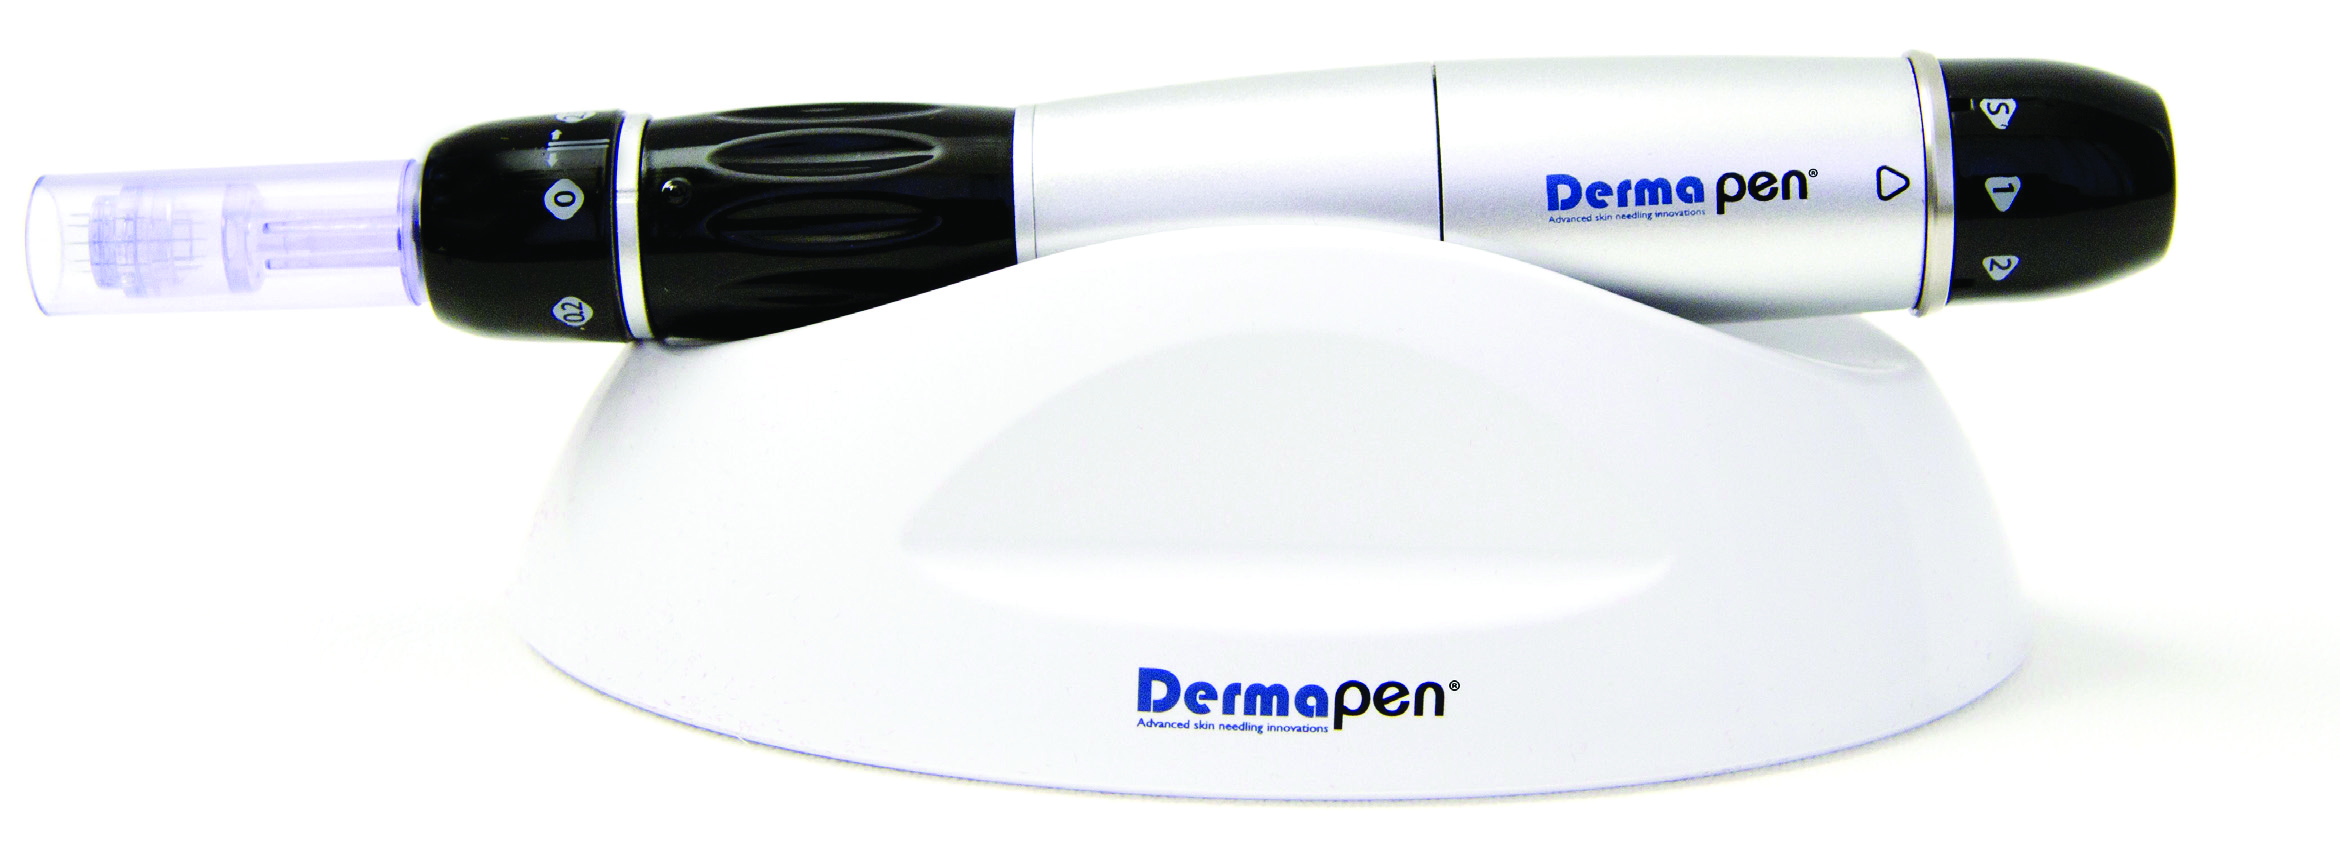 Dermapen Skin Therapy: the Latest in Skin Rejuvenation has Everyone on Pins and Needles